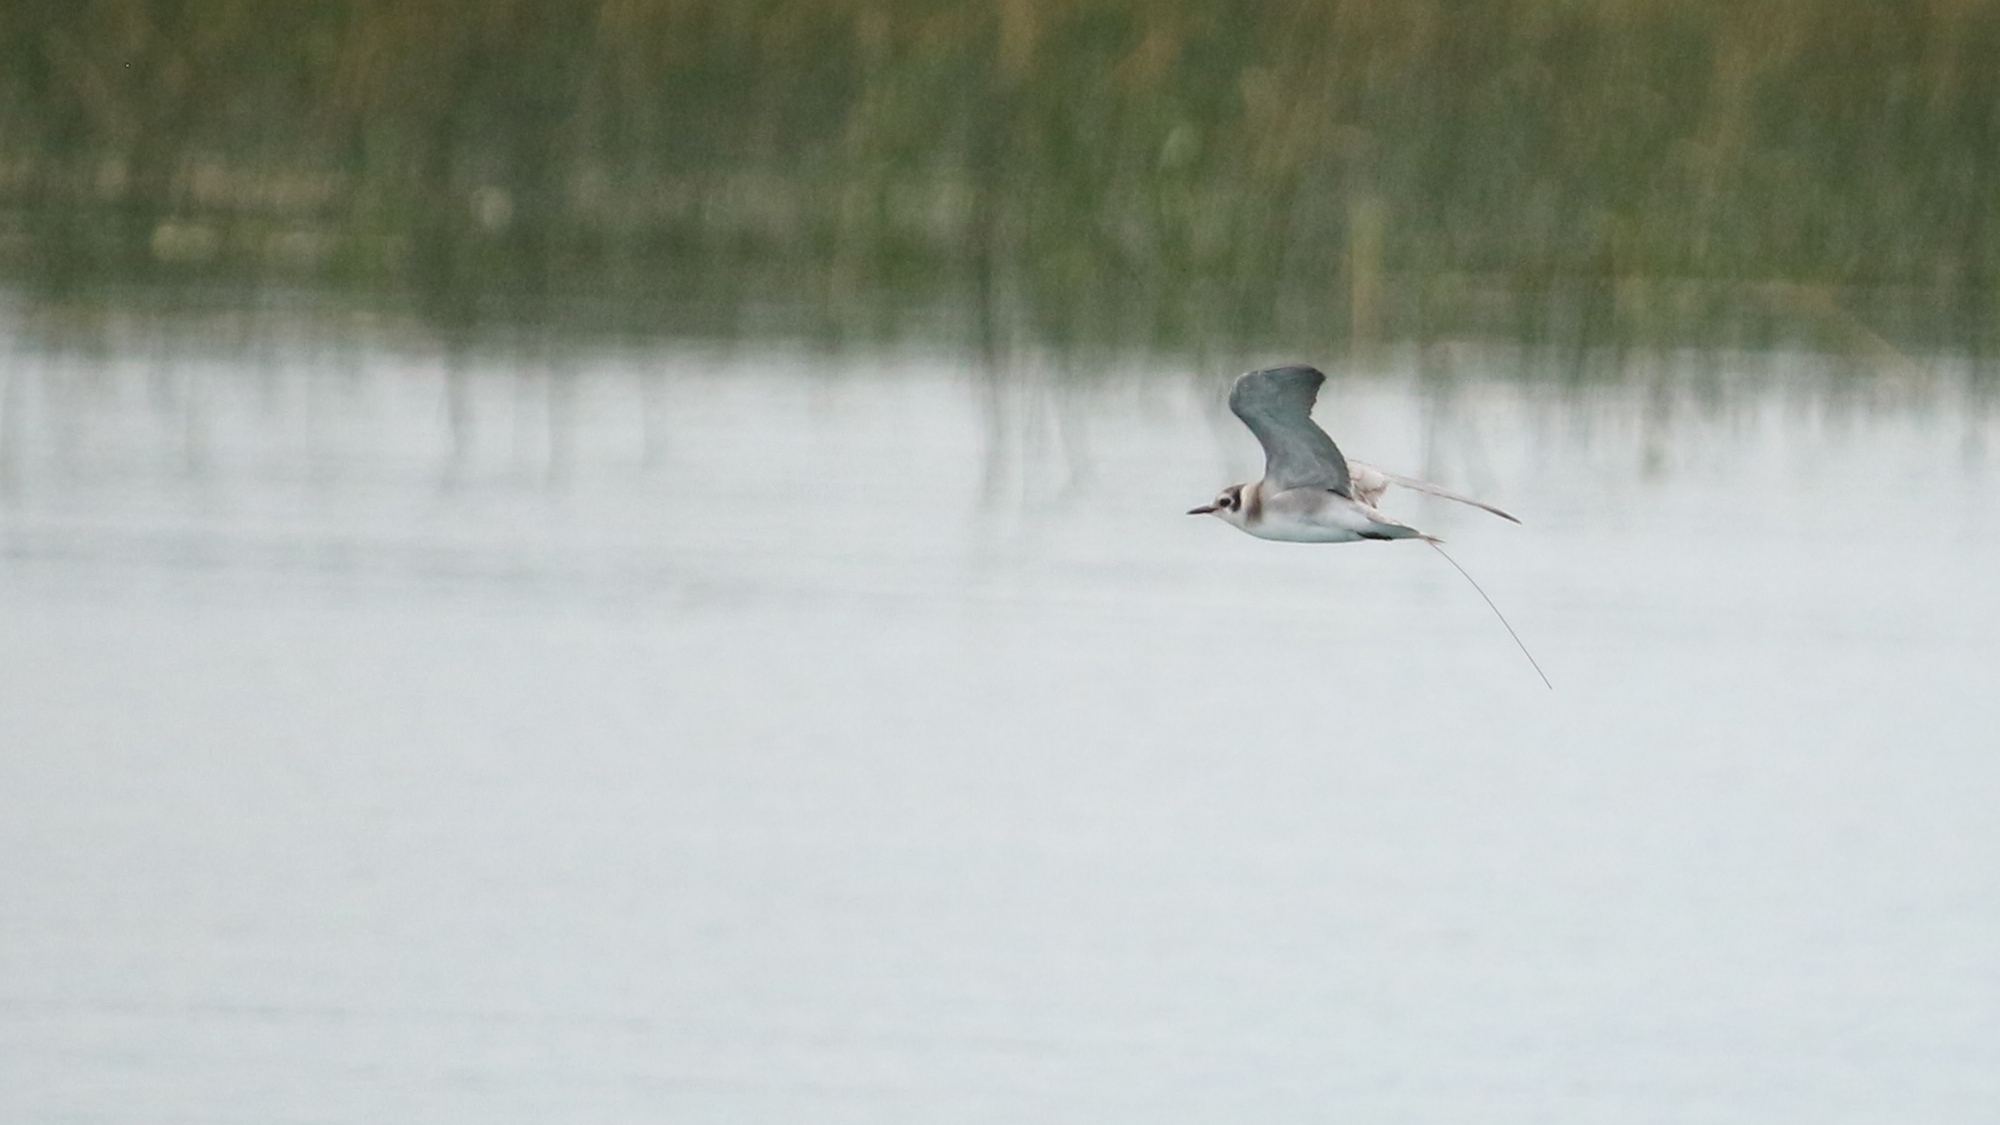 A juvenile black tern is in flight above water in a marsh. Green grass is visible in the background. The black tern is mostly white, but dark colorations are seen on its head and around its wings. 